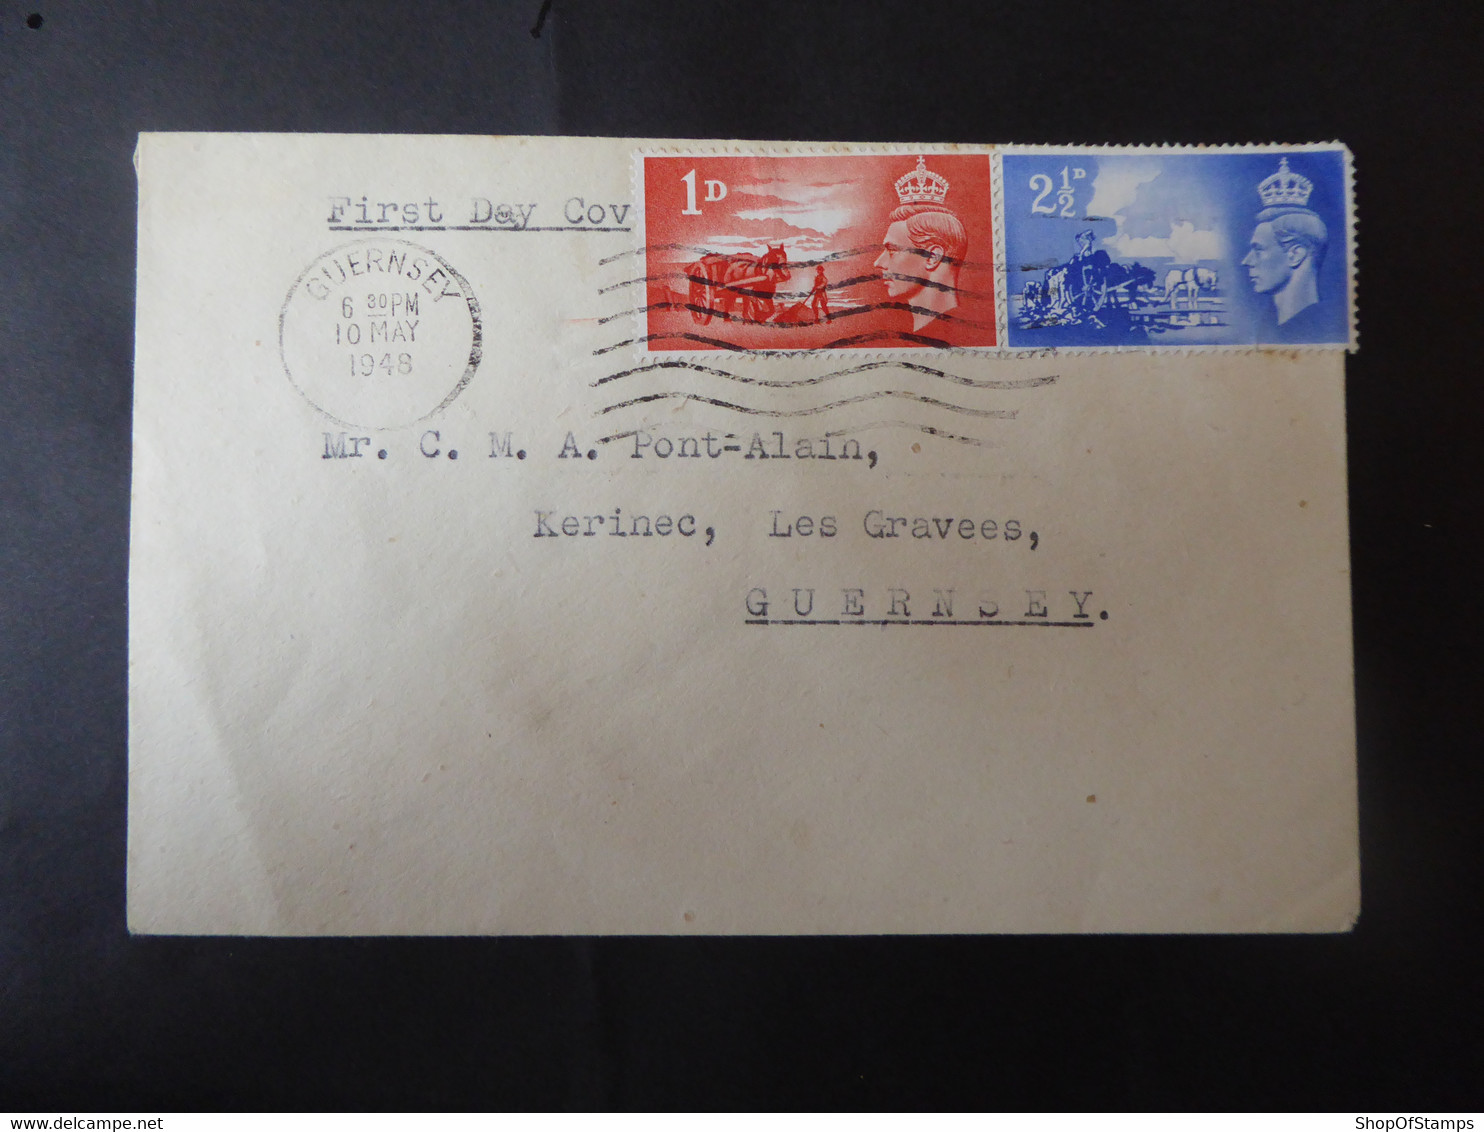 CHANNEL ISLANDS SG C1-2 FDC WITH POSTMARK GUERNSEY 10 MAY 1942 - Non Classificati